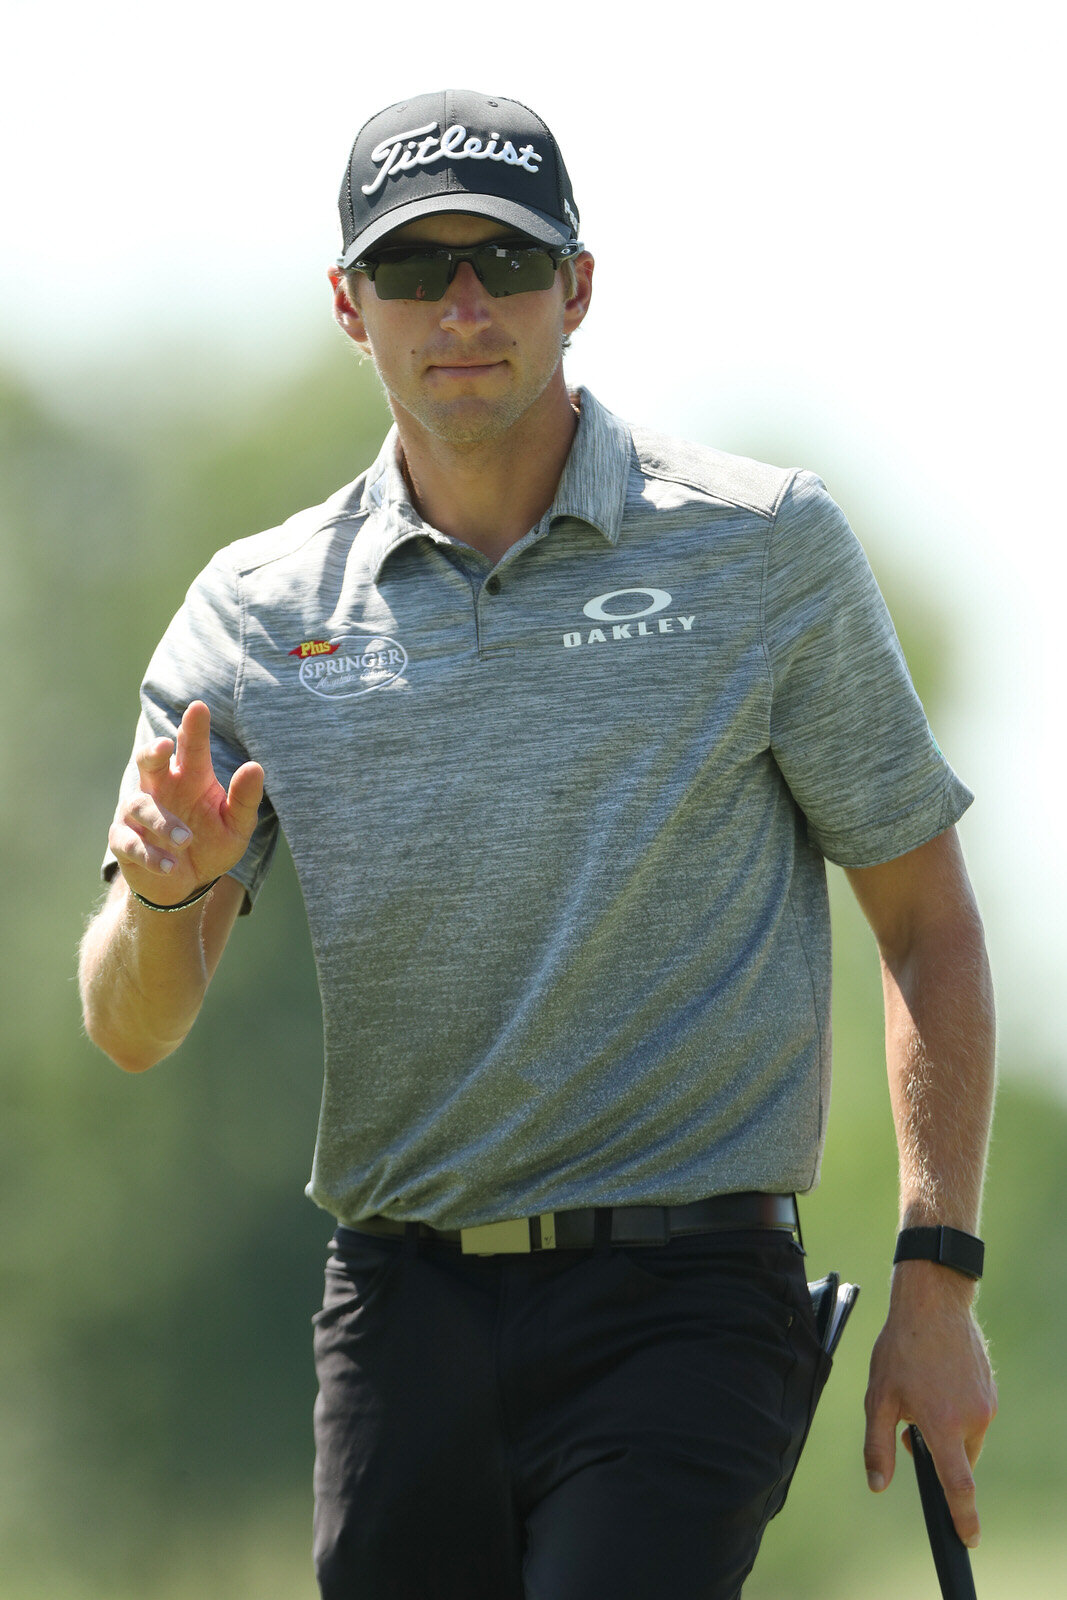  BLAINE, MINNESOTA - JULY 24: Richy Werenski of the United States reacts after a birdie putt on the eighth green during the second round of the 3M Open on July 24, 2020 at TPC Twin Cities in Blaine, Minnesota. (Photo by Matthew Stockman/Getty Images)